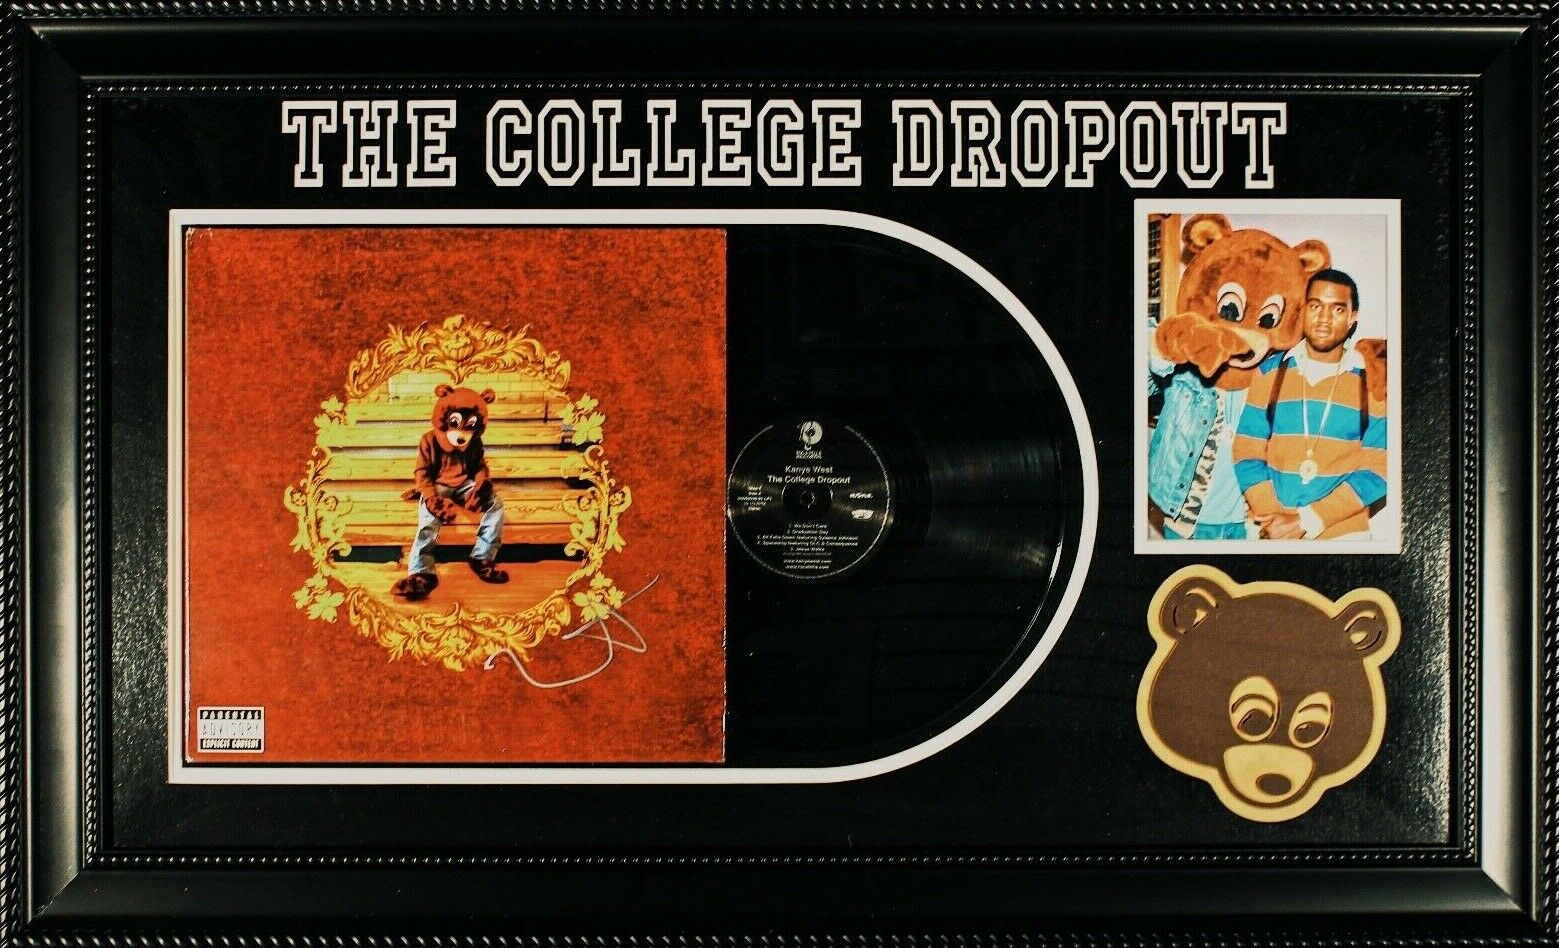 Universal CD # 6.864 Kanye West The College Drop out Edgarkarte Edgarcard 